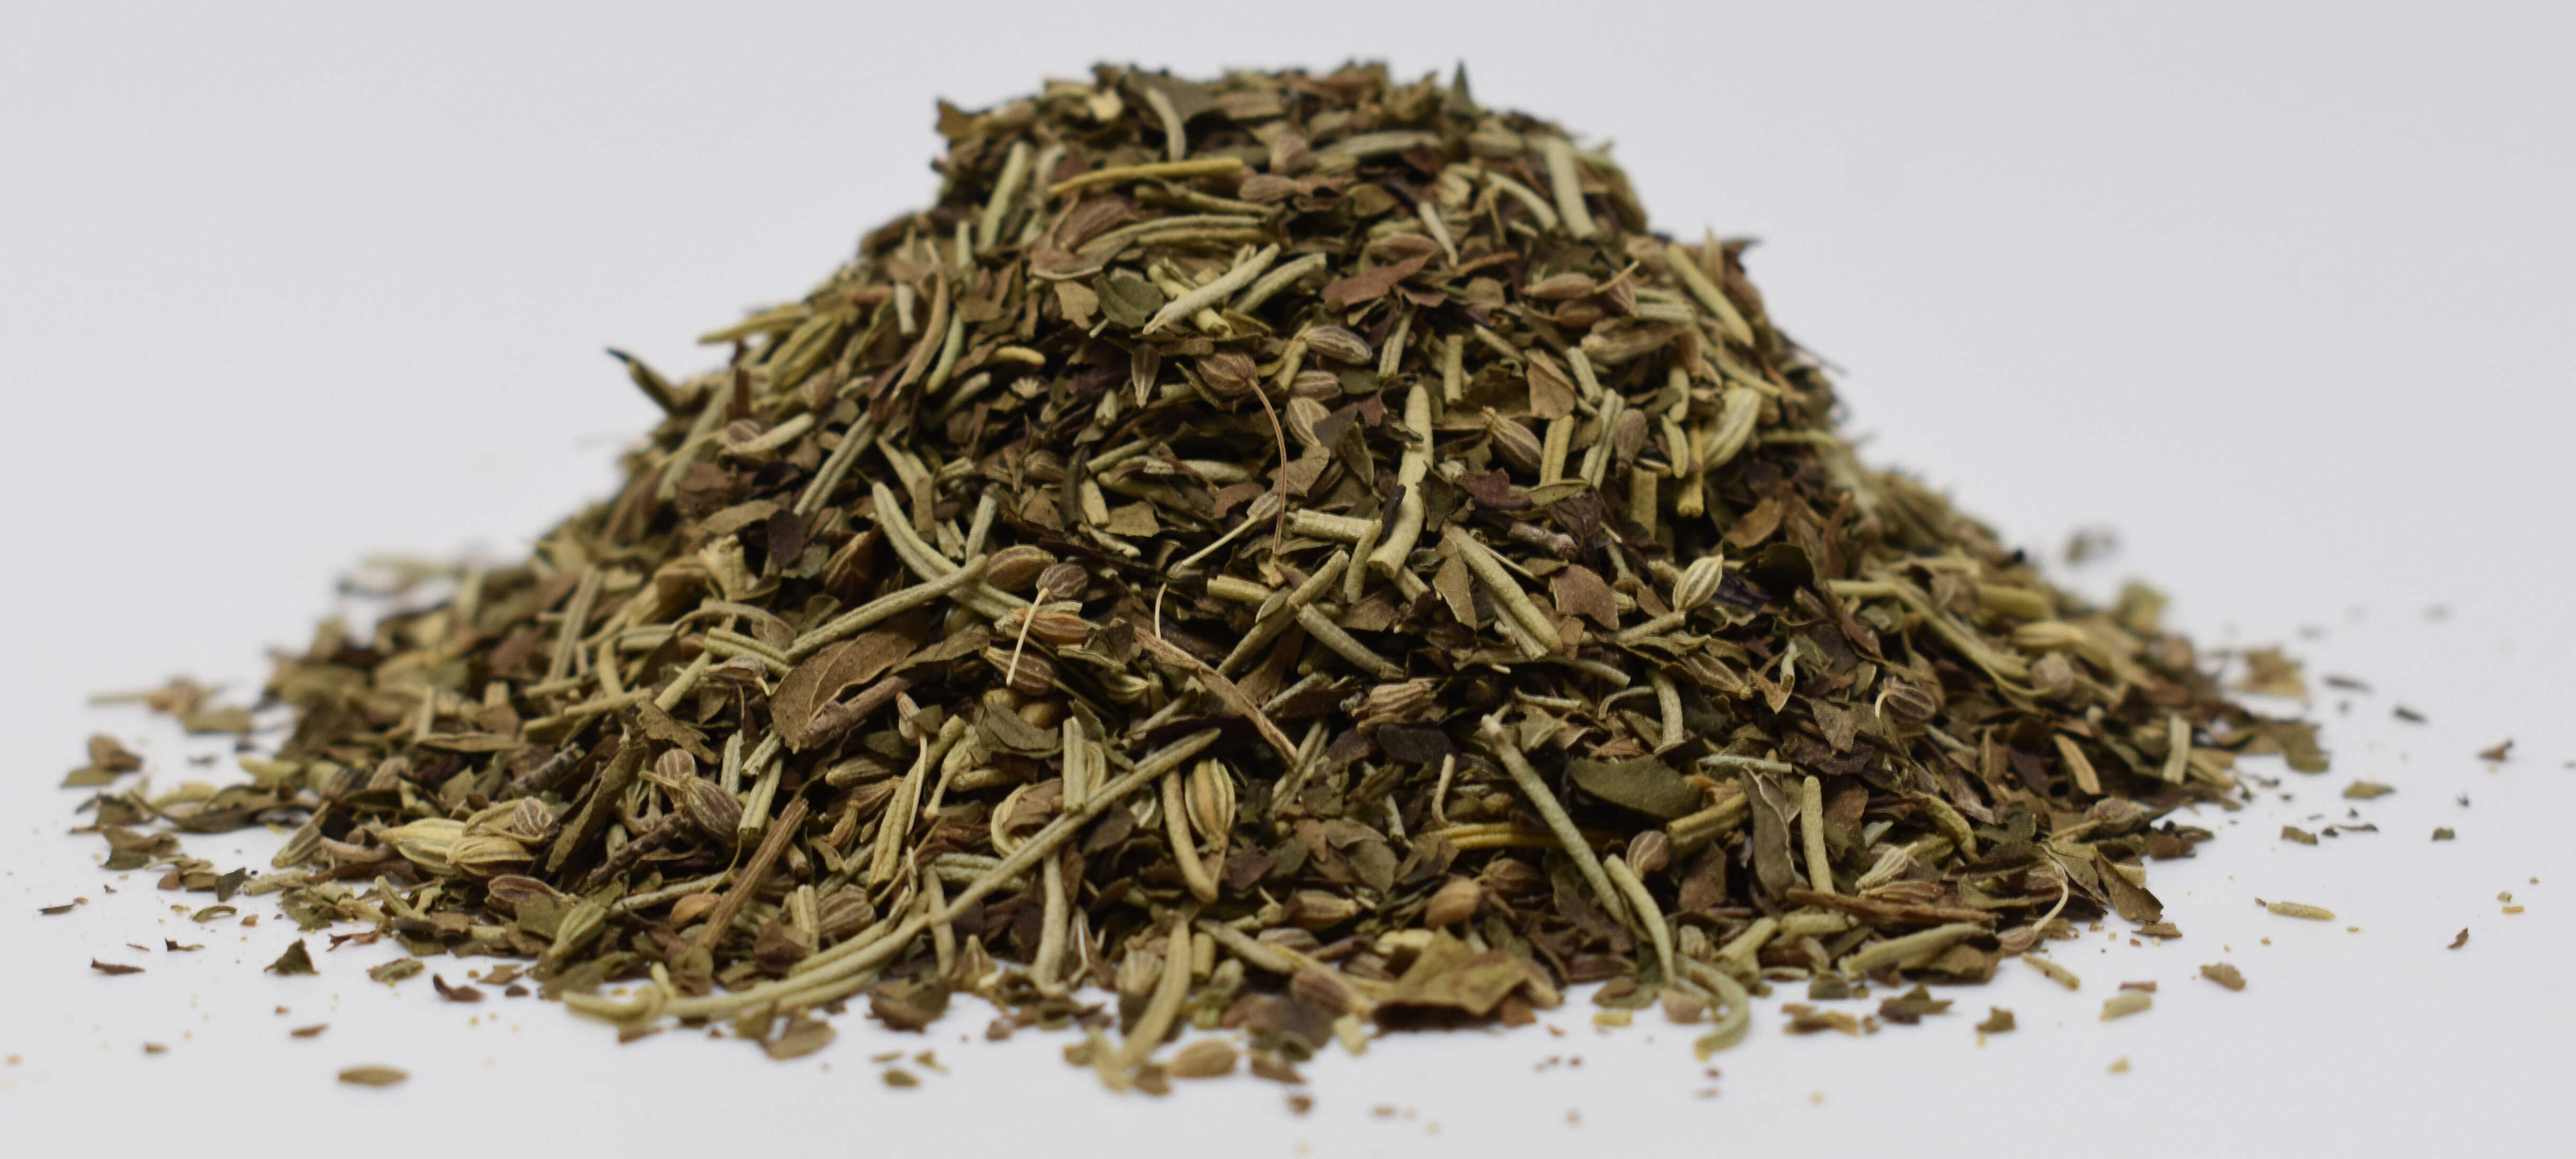 Anise, Rosemary and Peppermint Formula - Side Photo